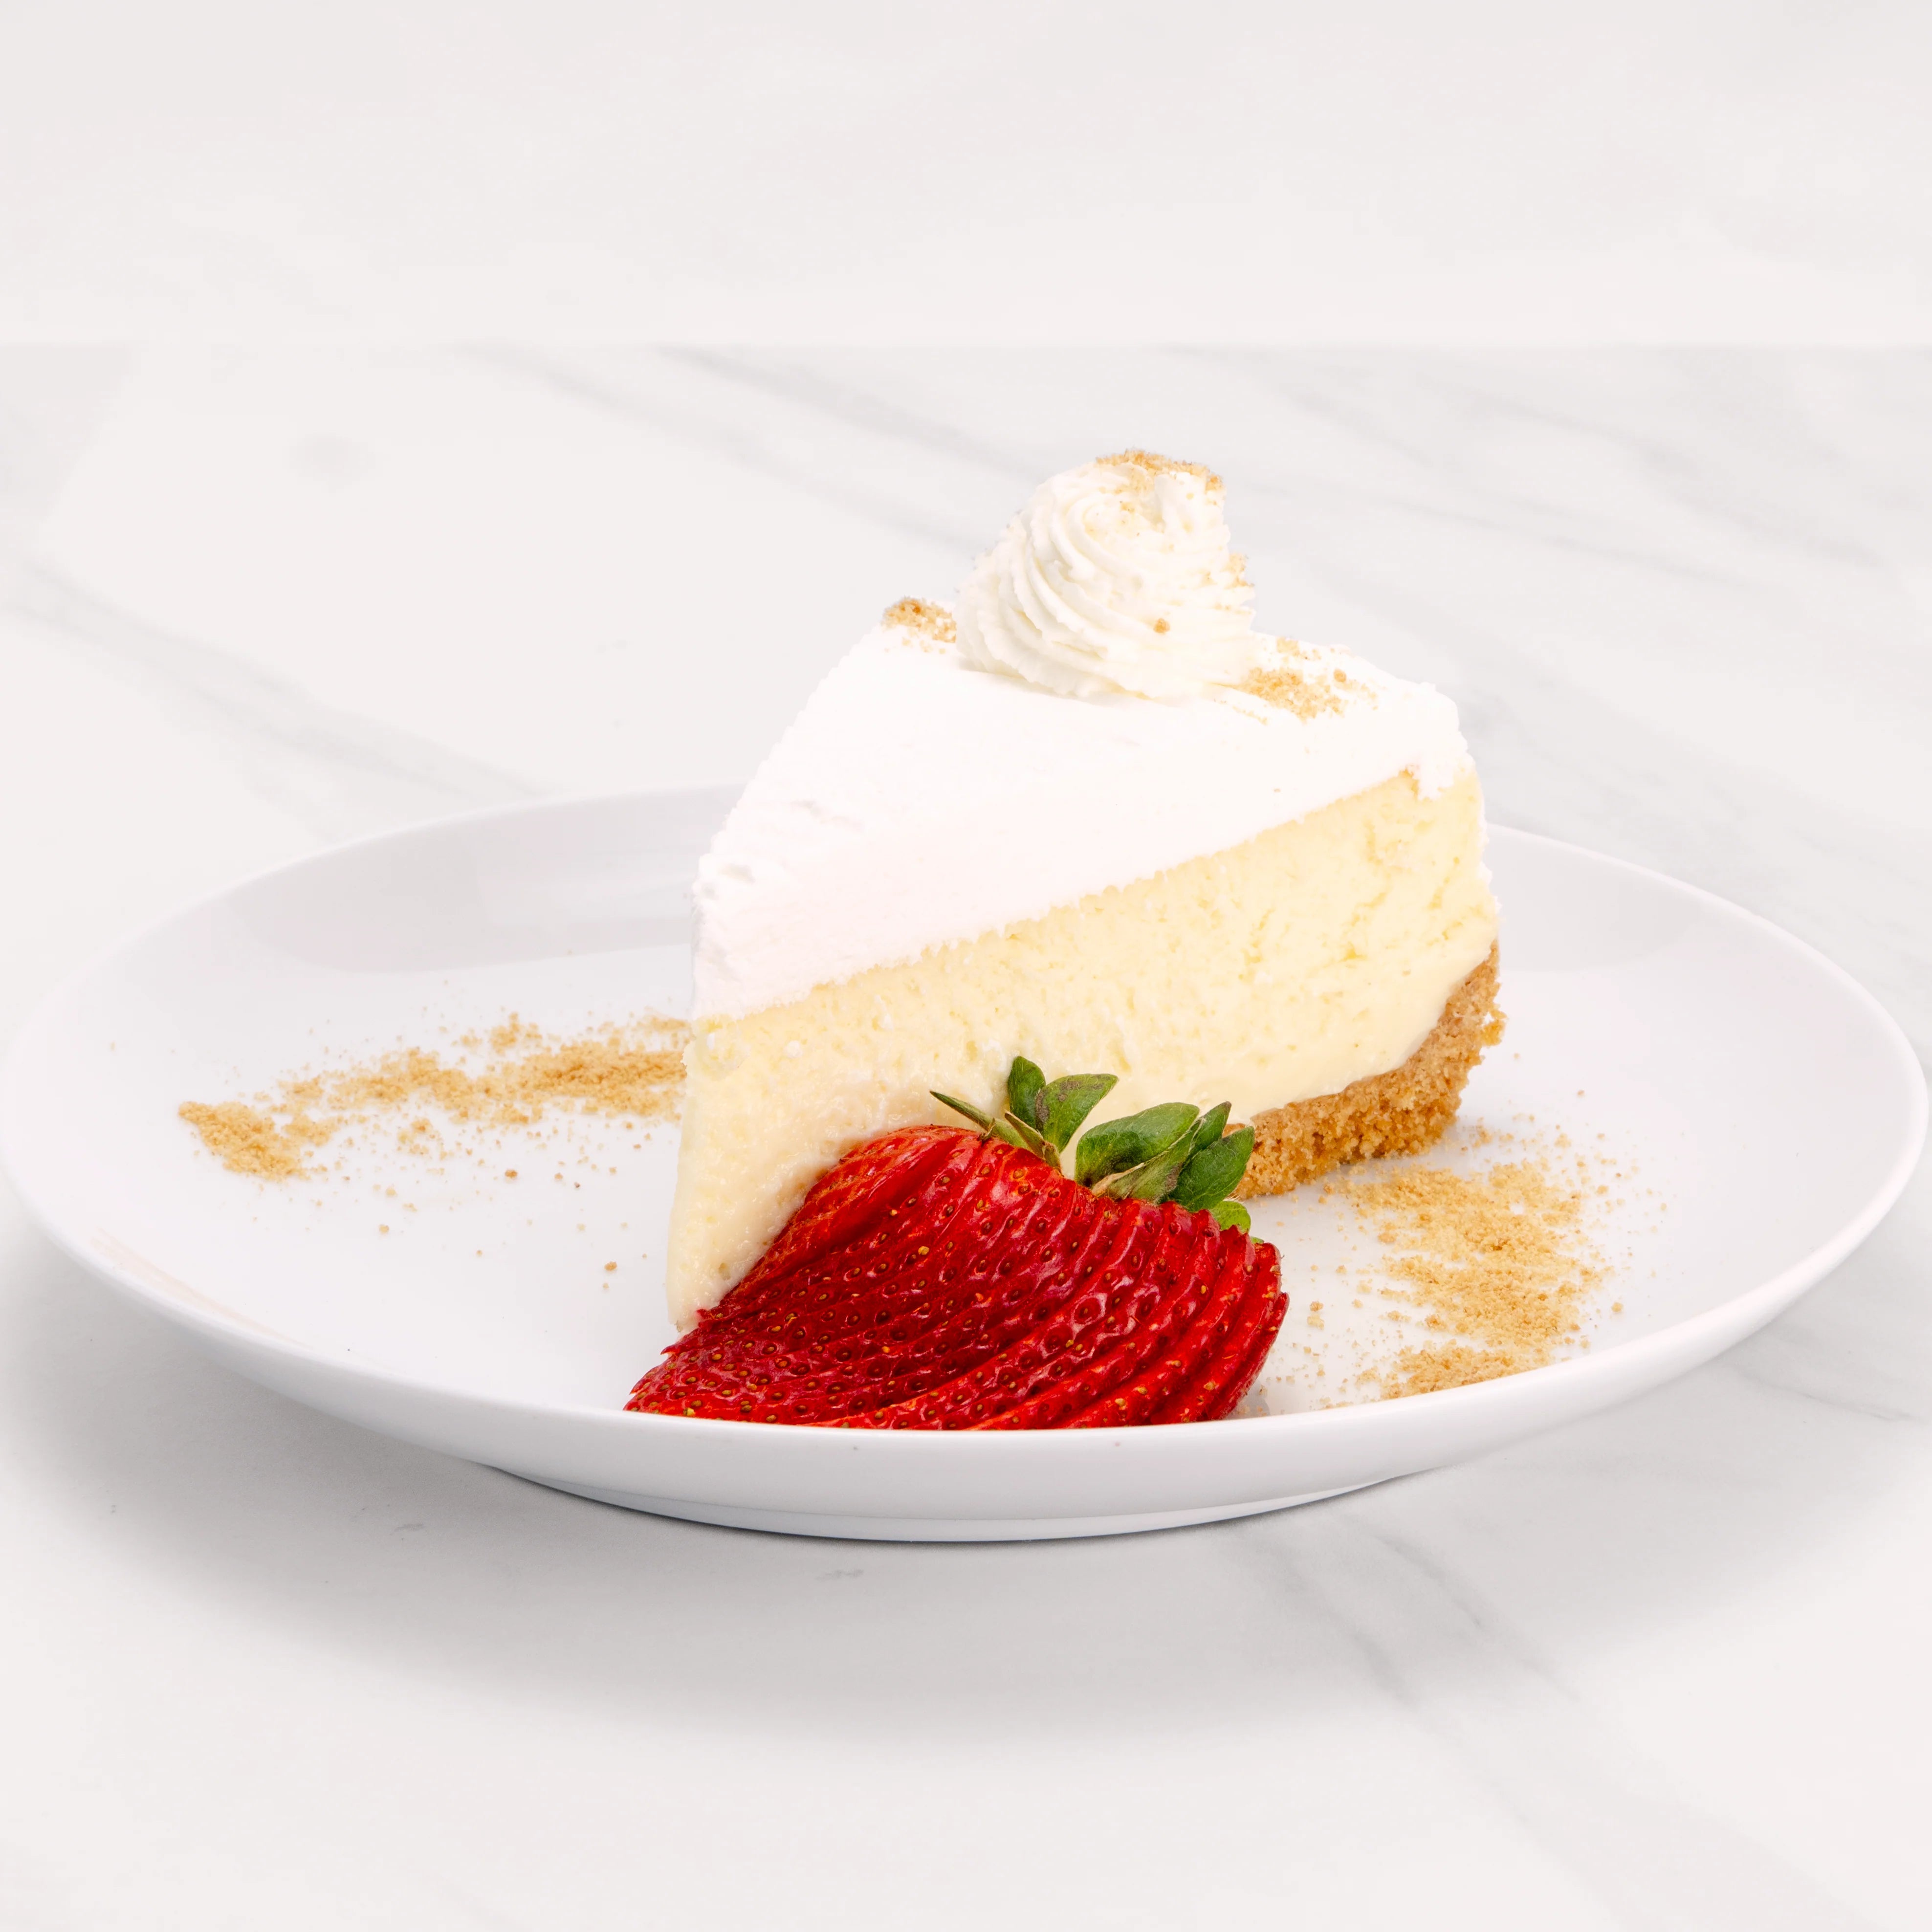 Slice of New York Cheesecake garnished with strawberries and sable.